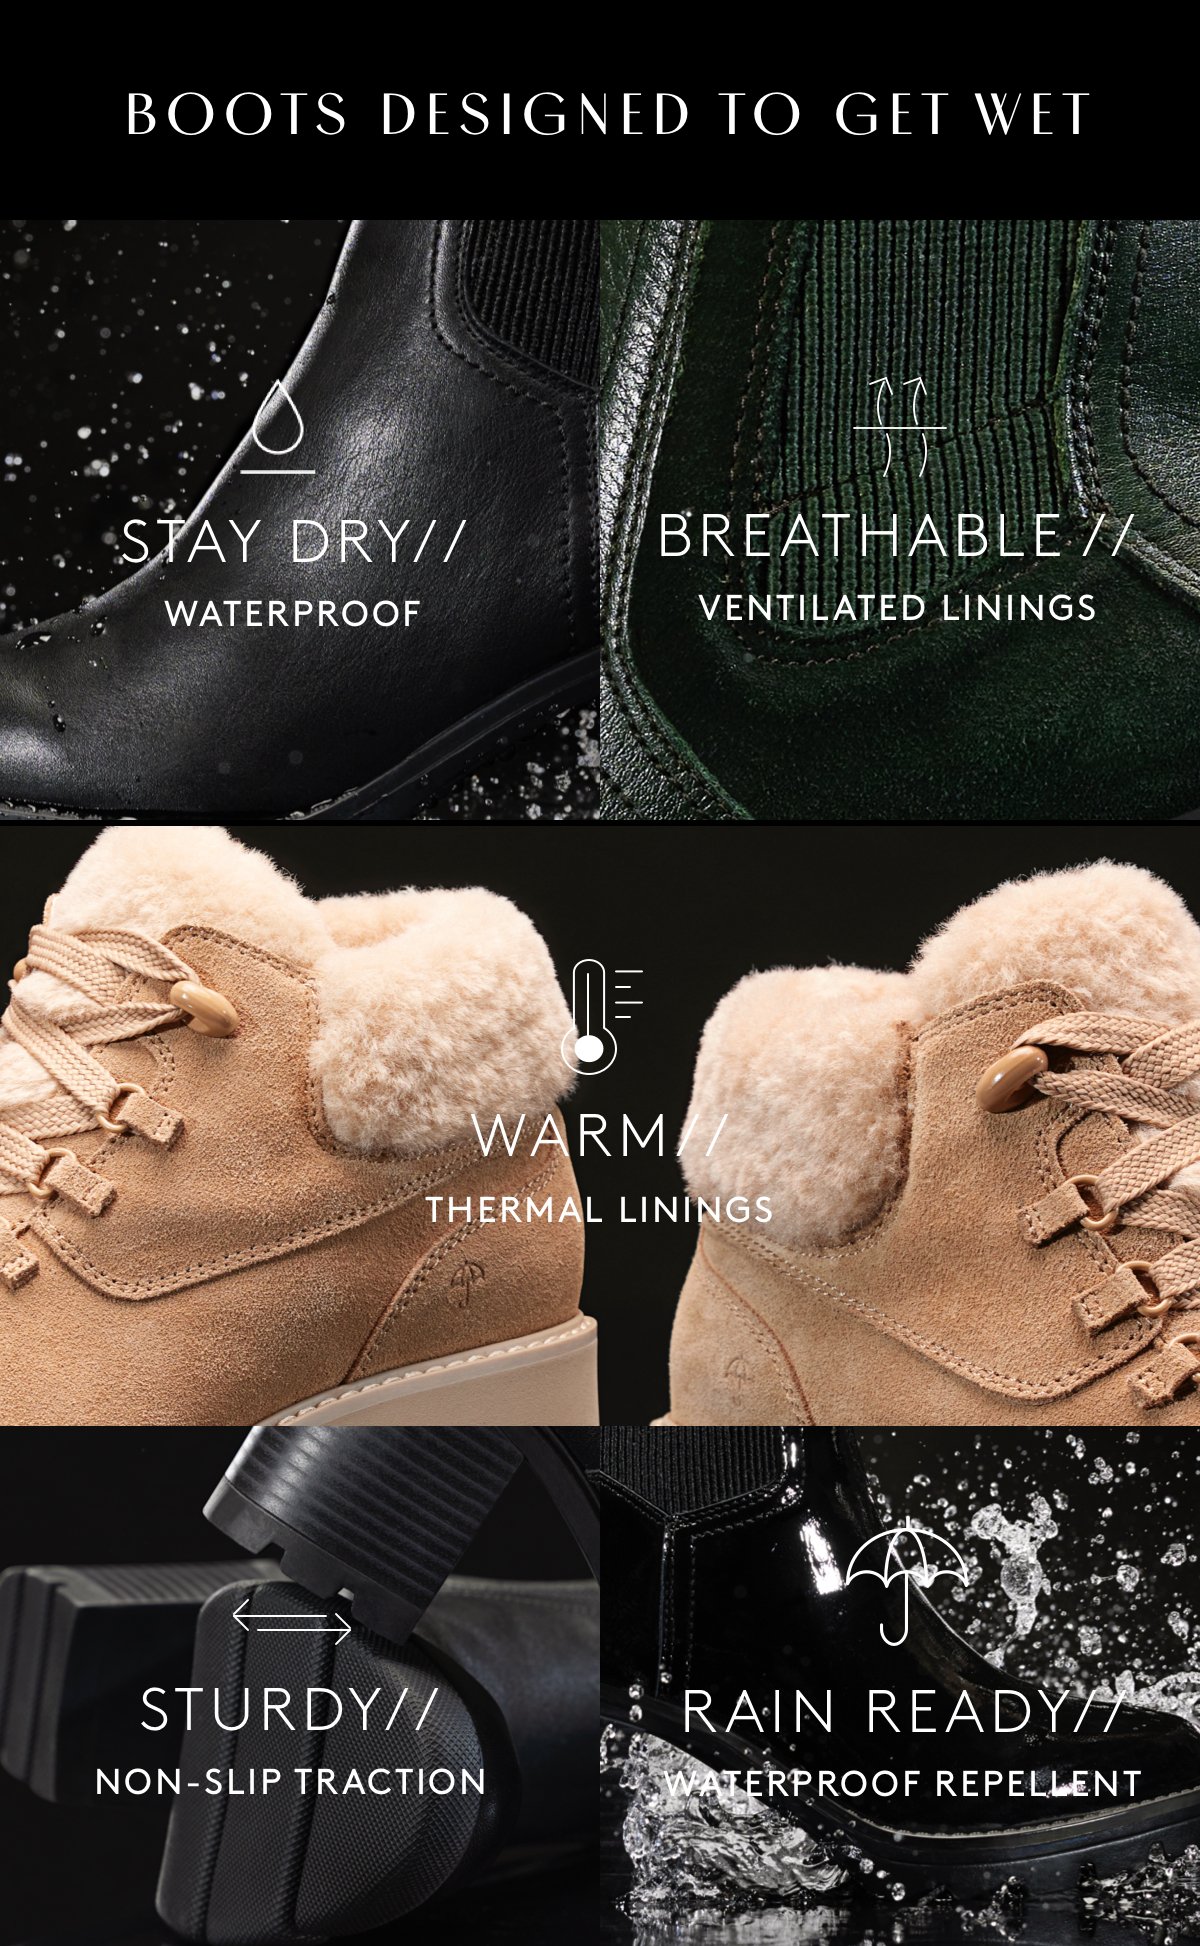 Boots Designed To Get Wet / Stay Dry // Waterproof / Rain Ready // Water Repellent / Warm // Thermal Linings / Sturdy // Non-slip Traction / Breathable // Ventilated Linings